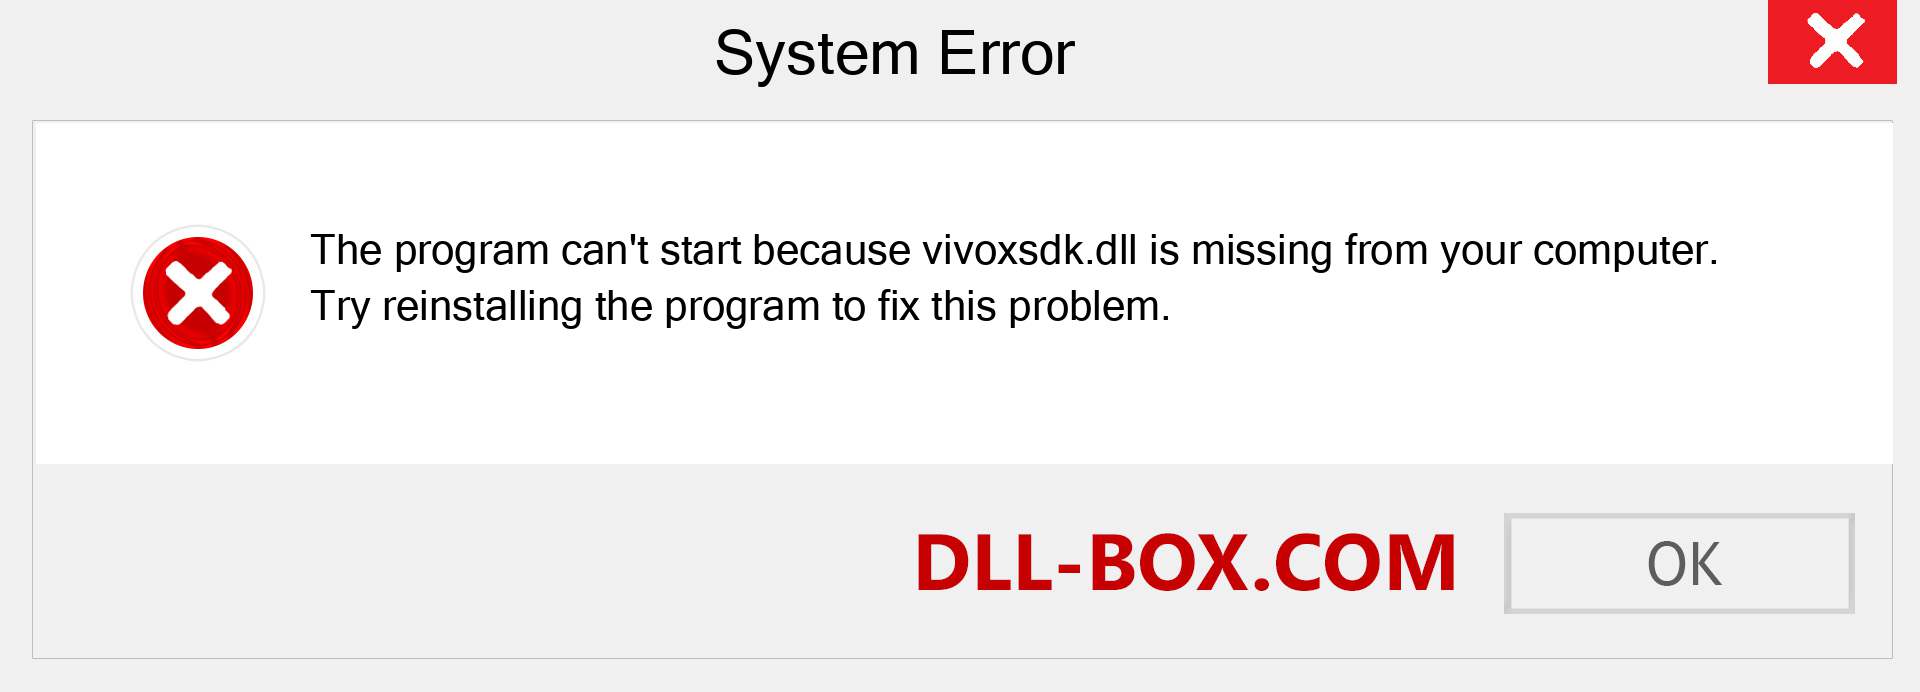  vivoxsdk.dll file is missing?. Download for Windows 7, 8, 10 - Fix  vivoxsdk dll Missing Error on Windows, photos, images